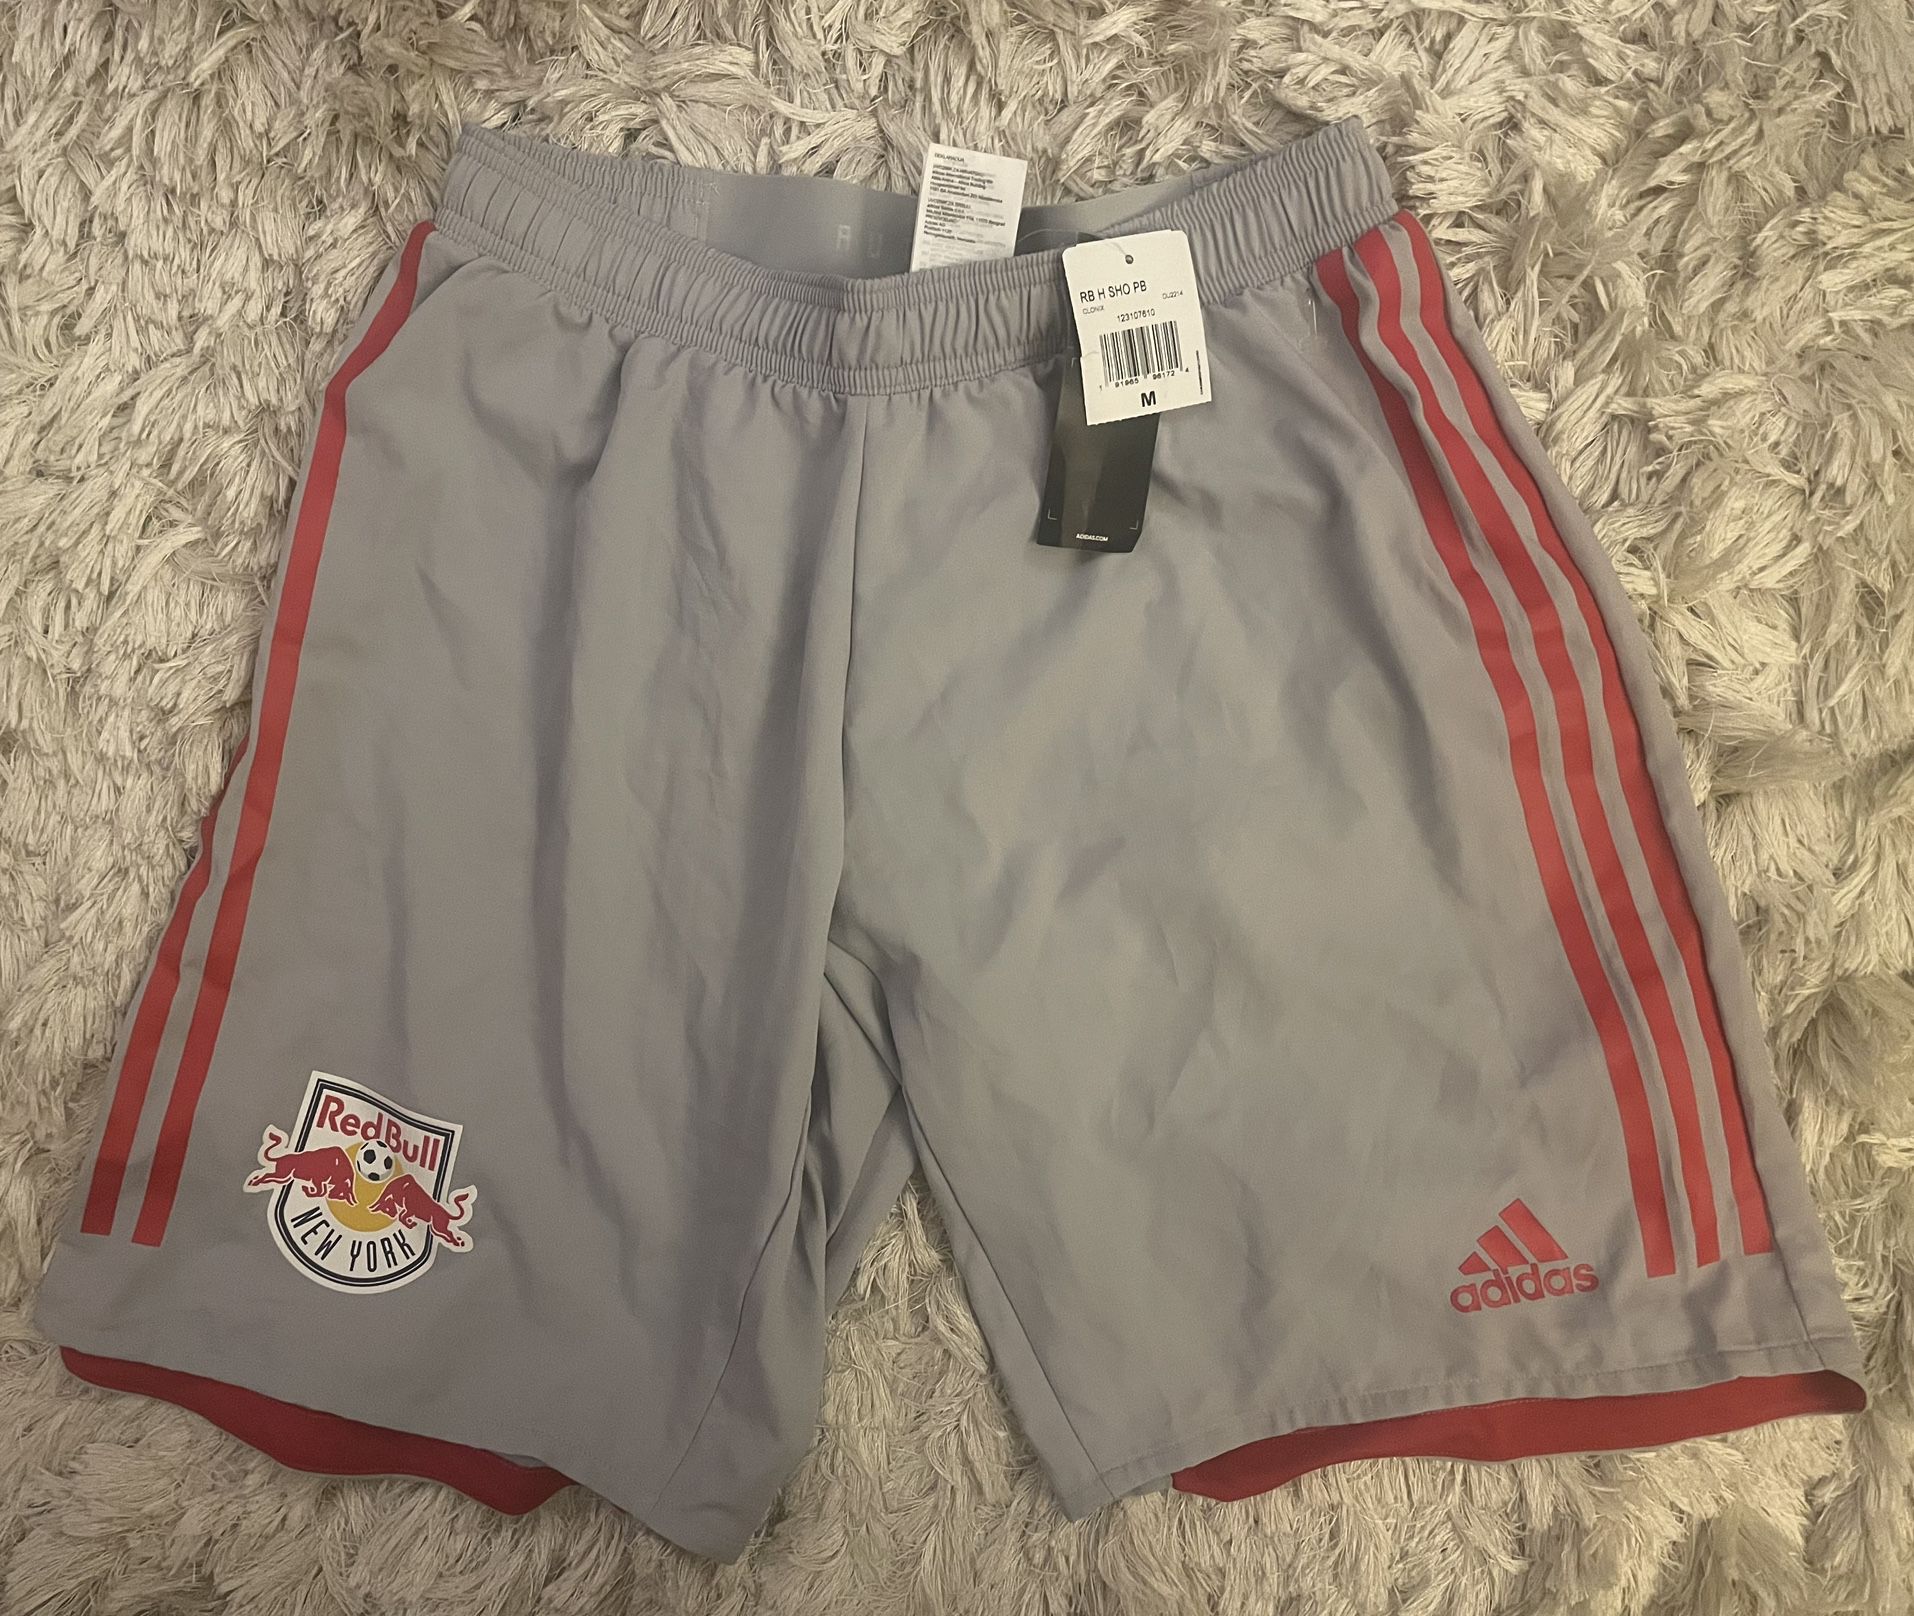 Adidas MLS Authentic New York Red Bull Home Soccer Shorts Football Men’s Size Medium M Players Version 